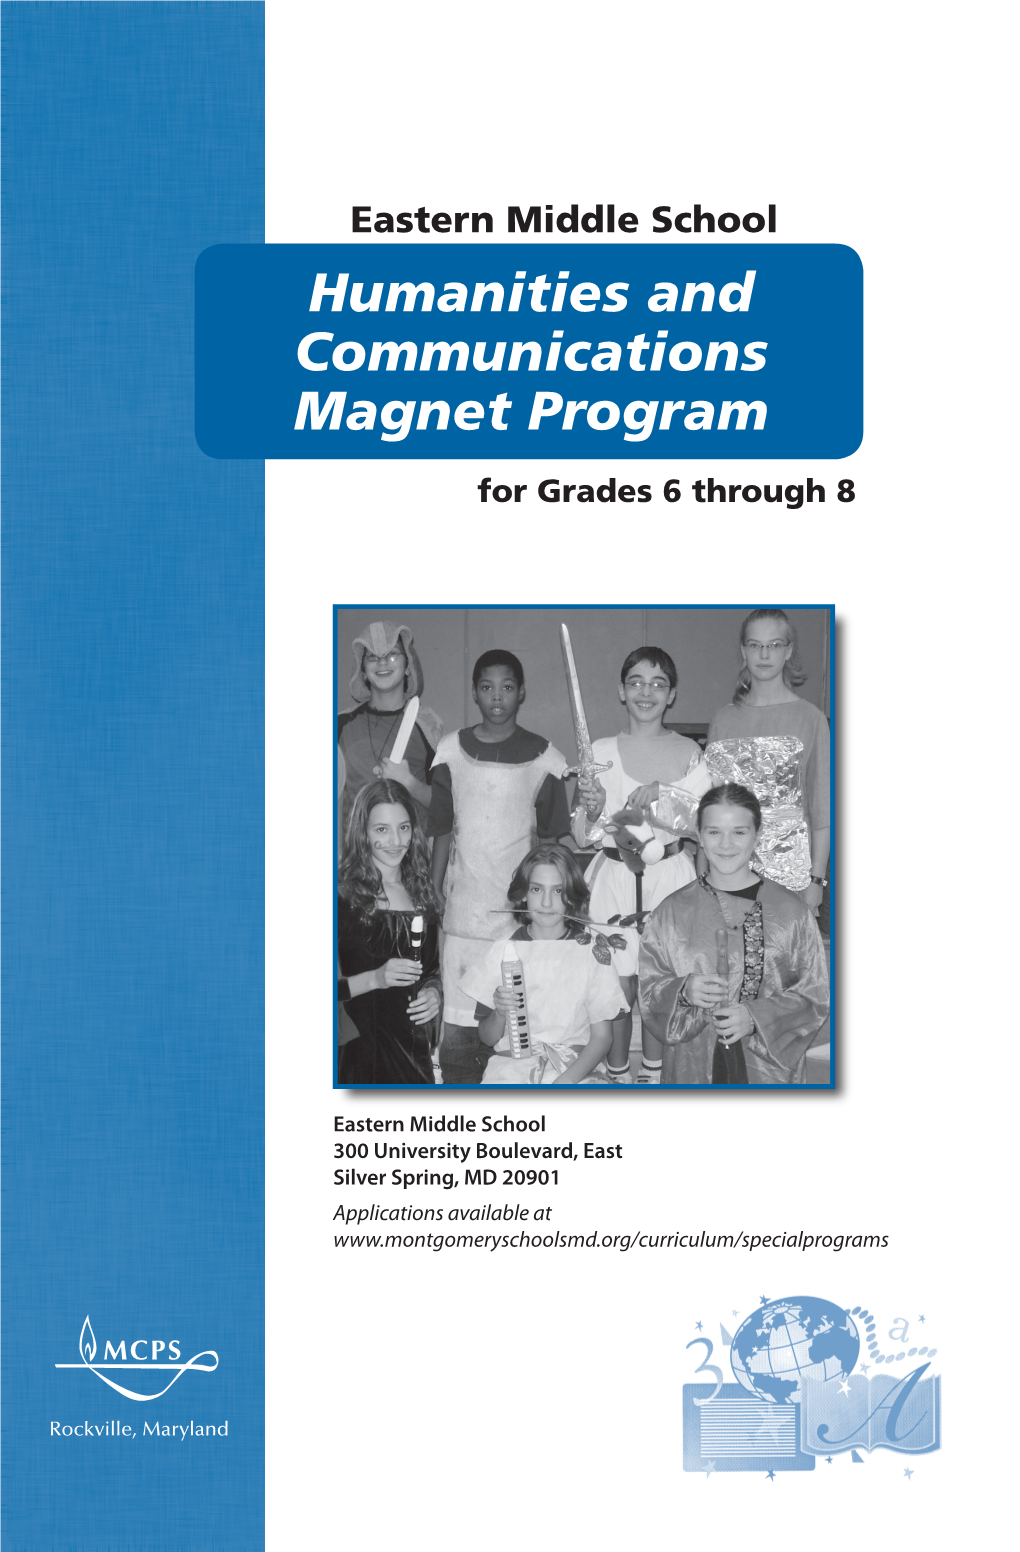 Eastern Middle School Humanities and Communications Magnet Program